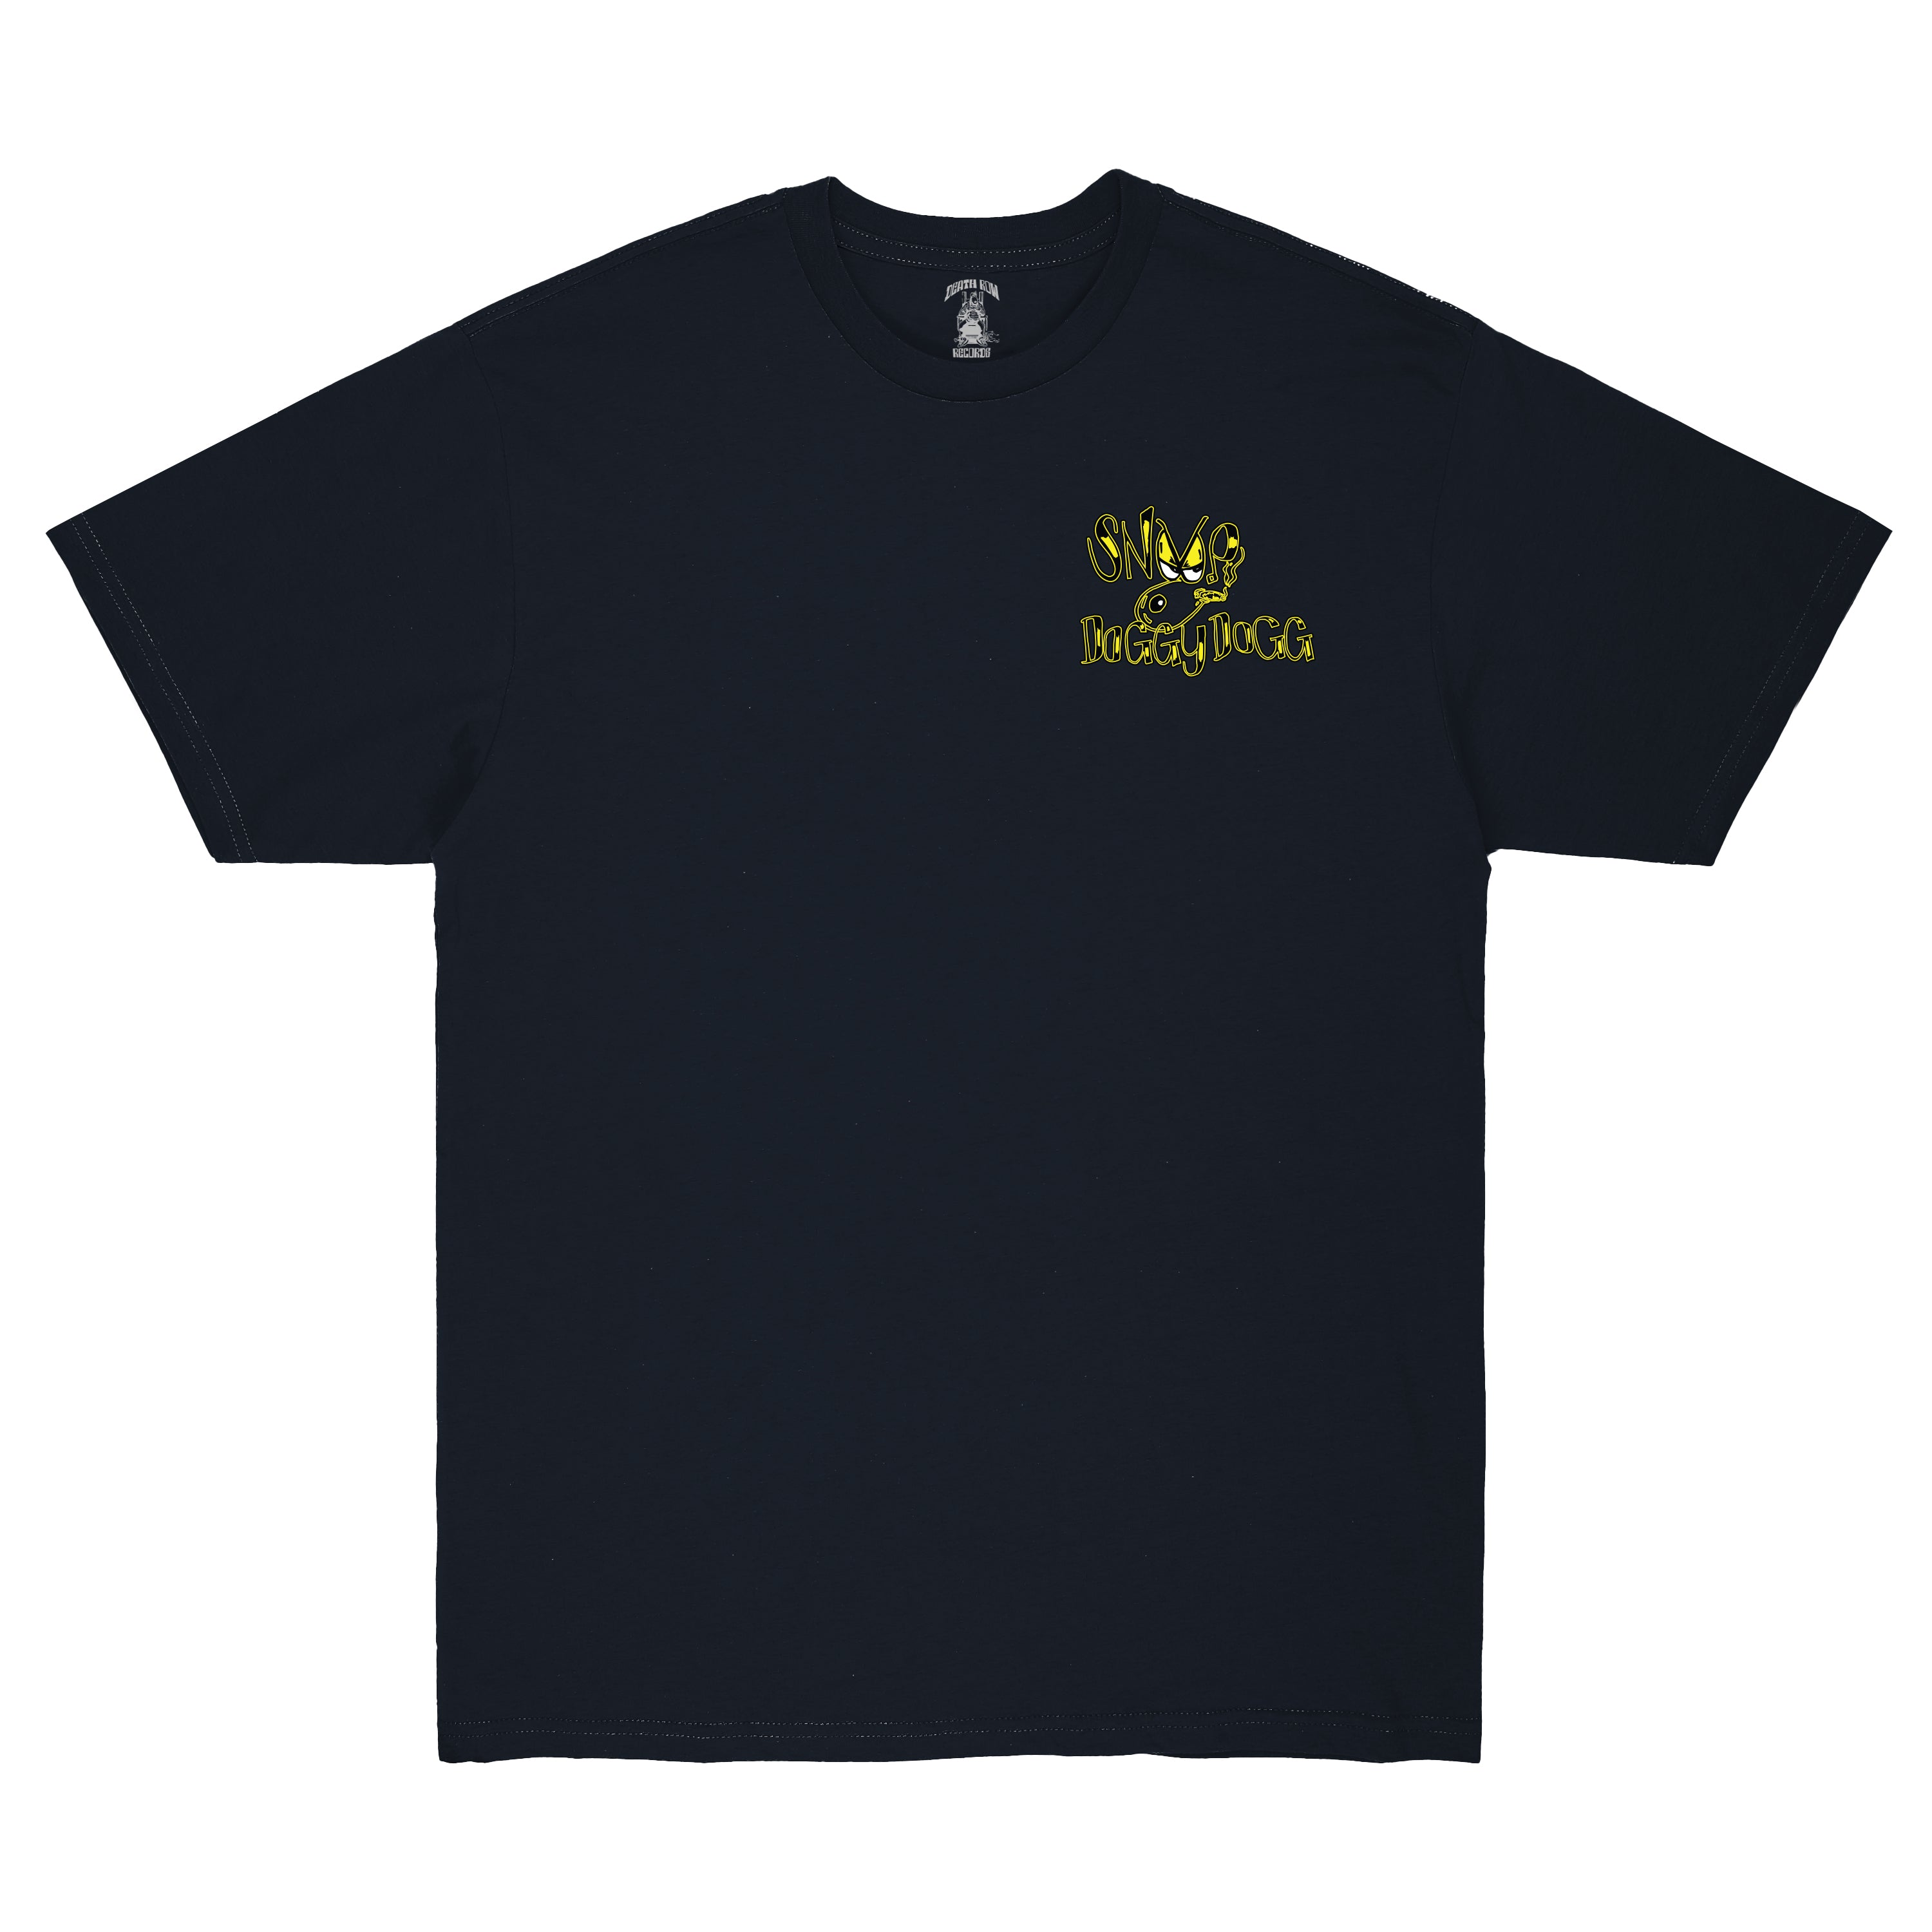 Doggystyle 30 Year Album Cover Tee